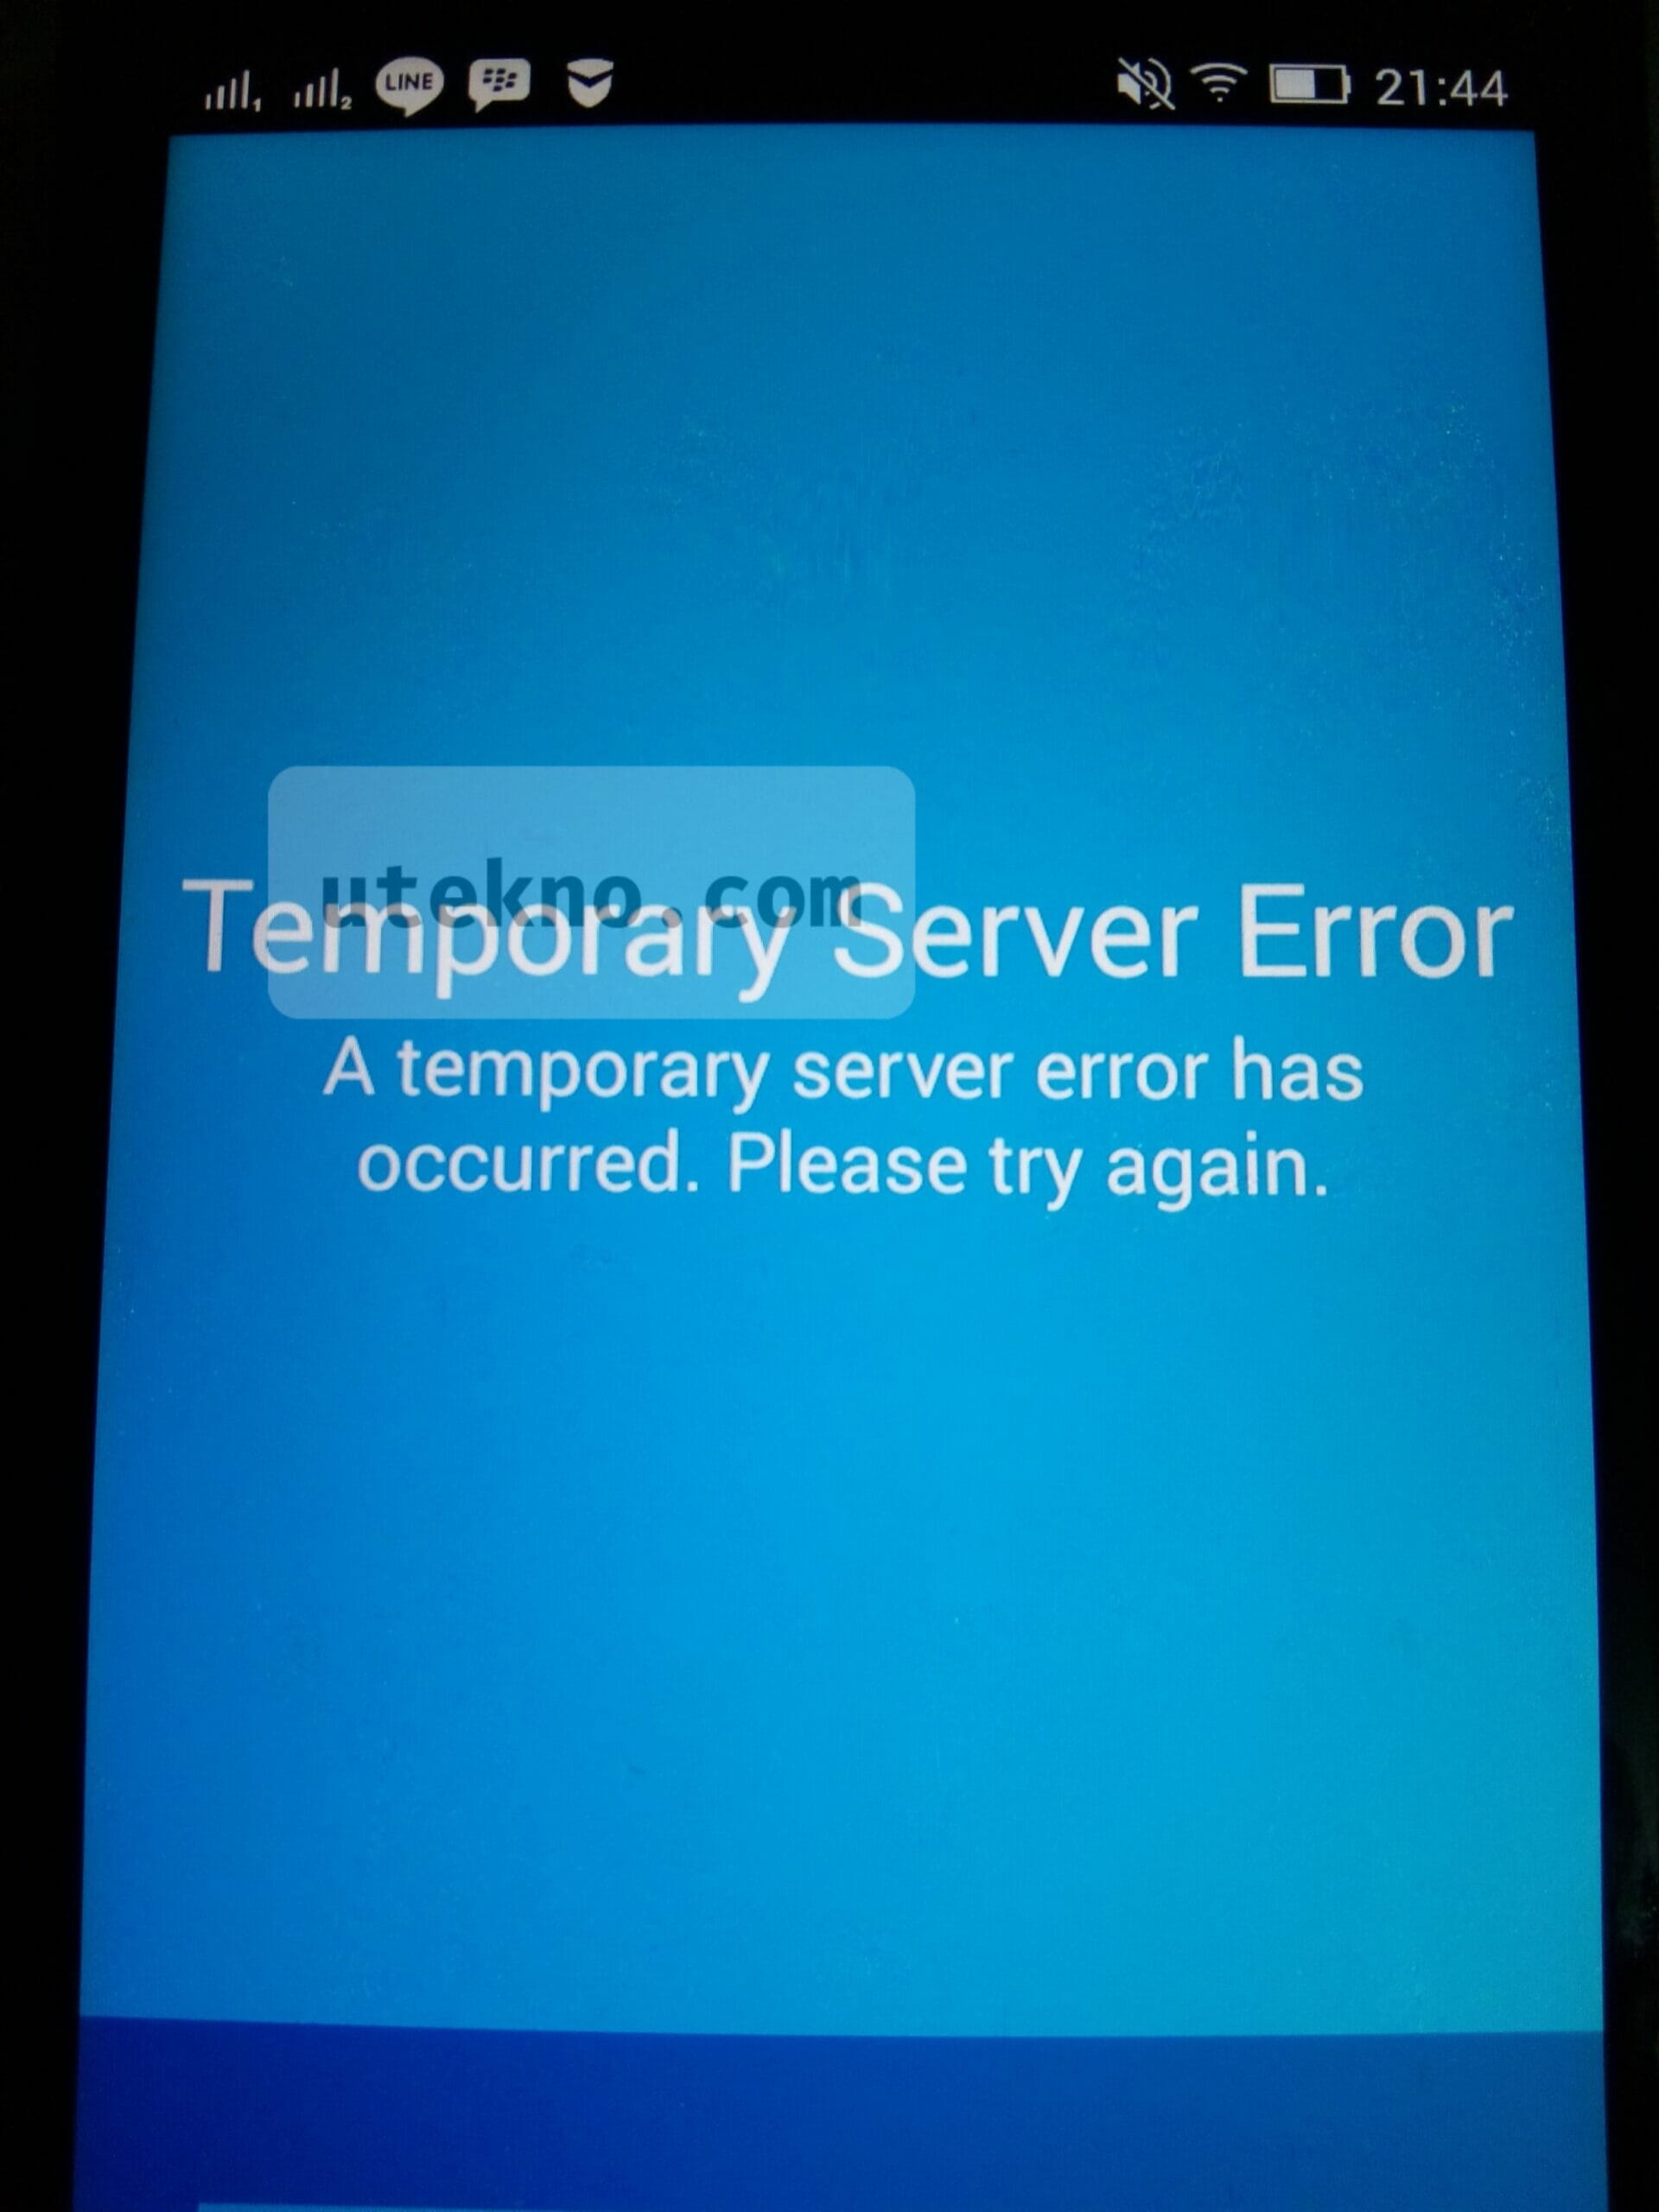 A temporary Error has occurred while logging in. Temp server